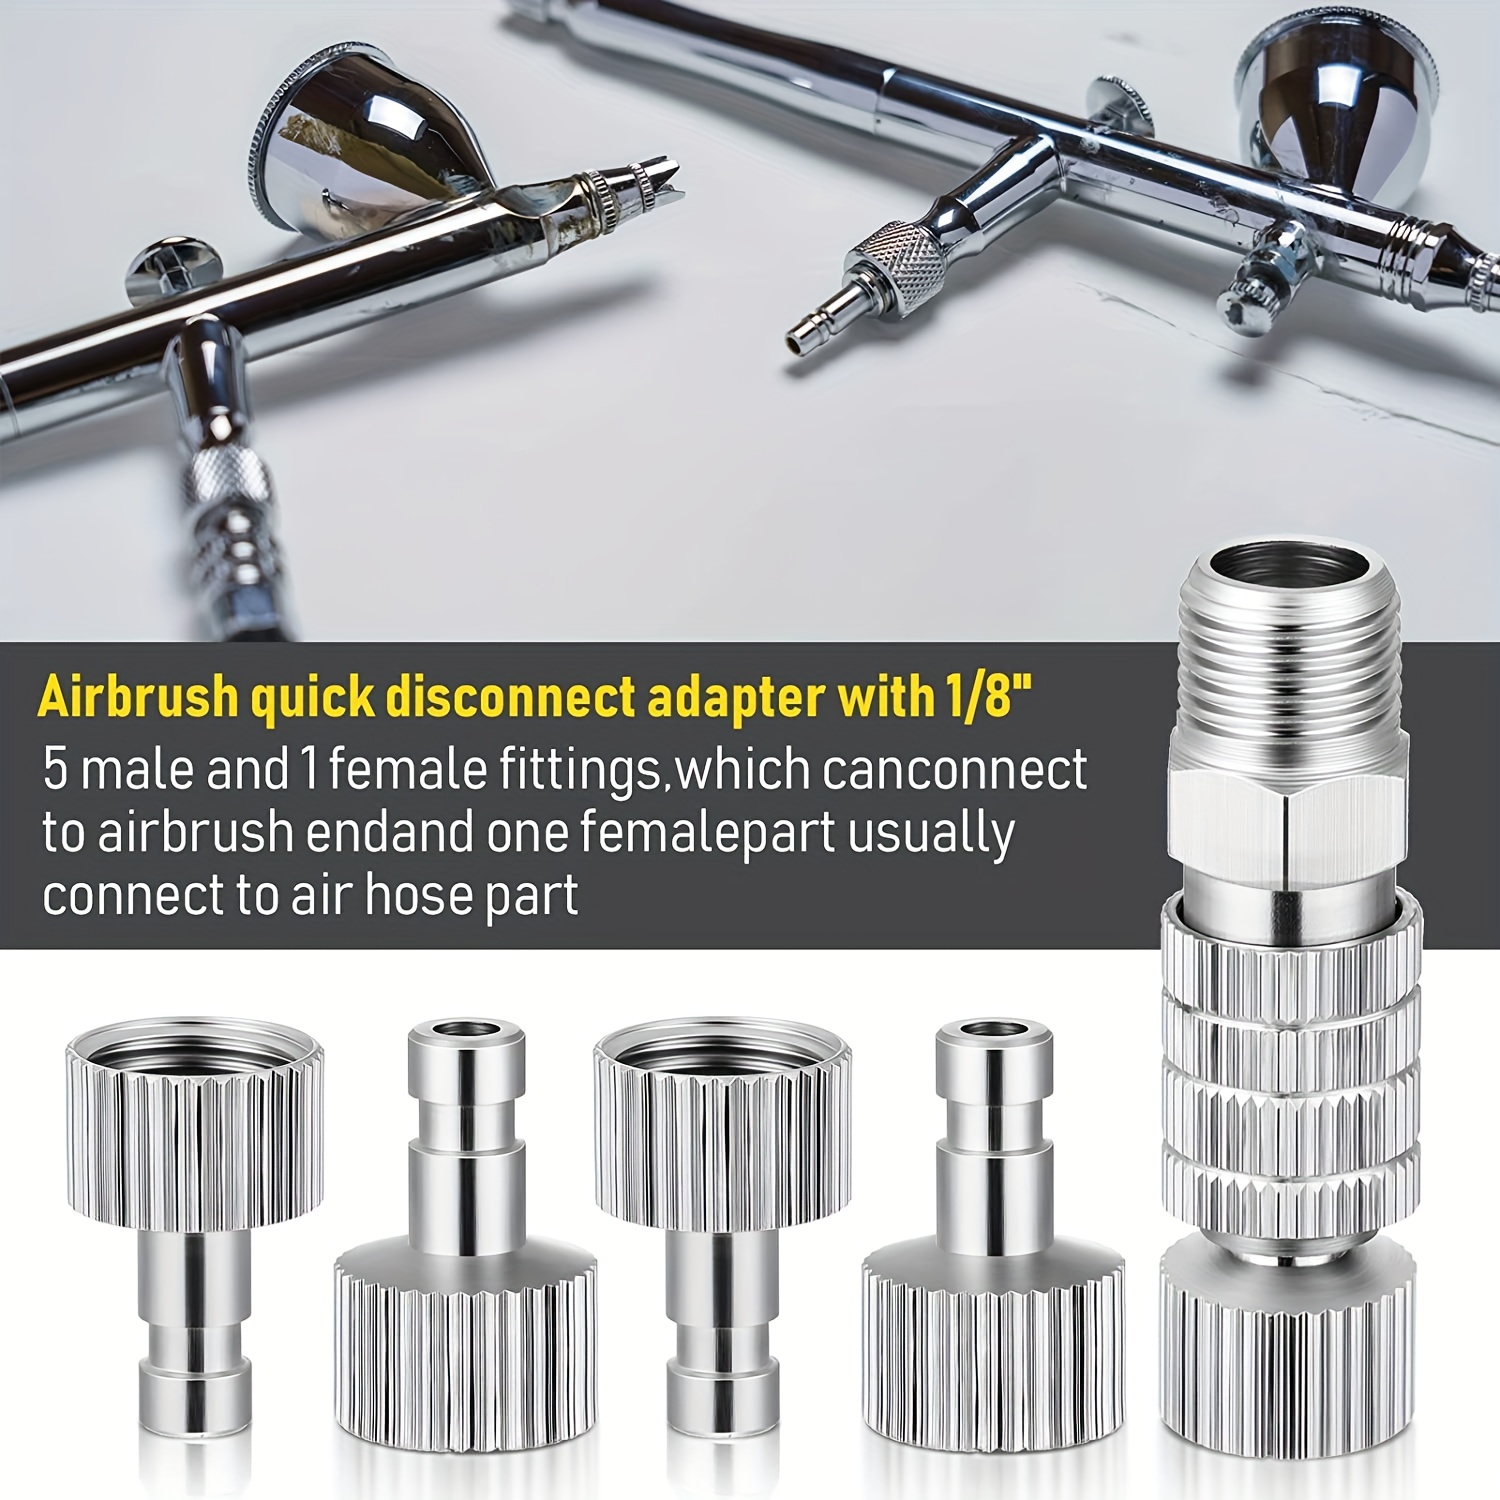 Airbrush Quick Disconnect Coupler x 4 Airbrush Connectors - BartSharp  Airbrush